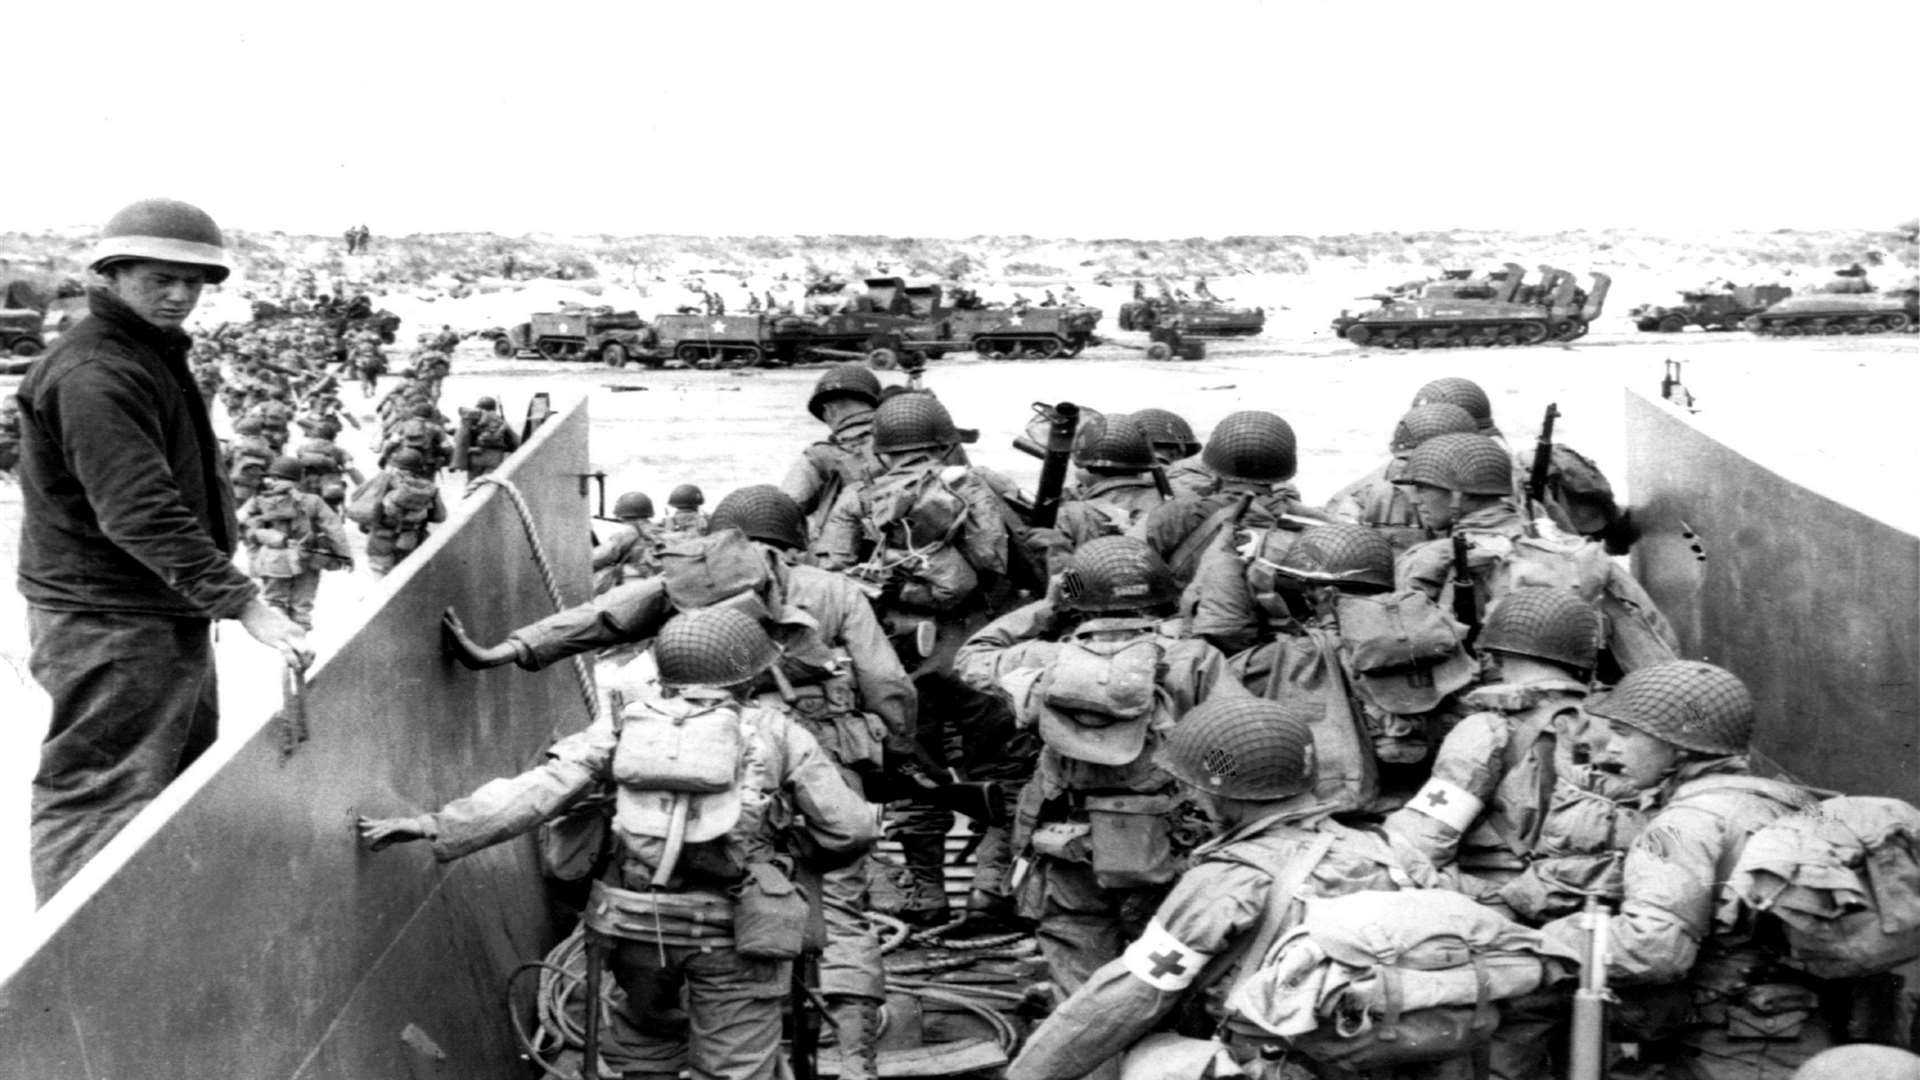 US Army soldiers disembark from a landing craft during the Normandy landings